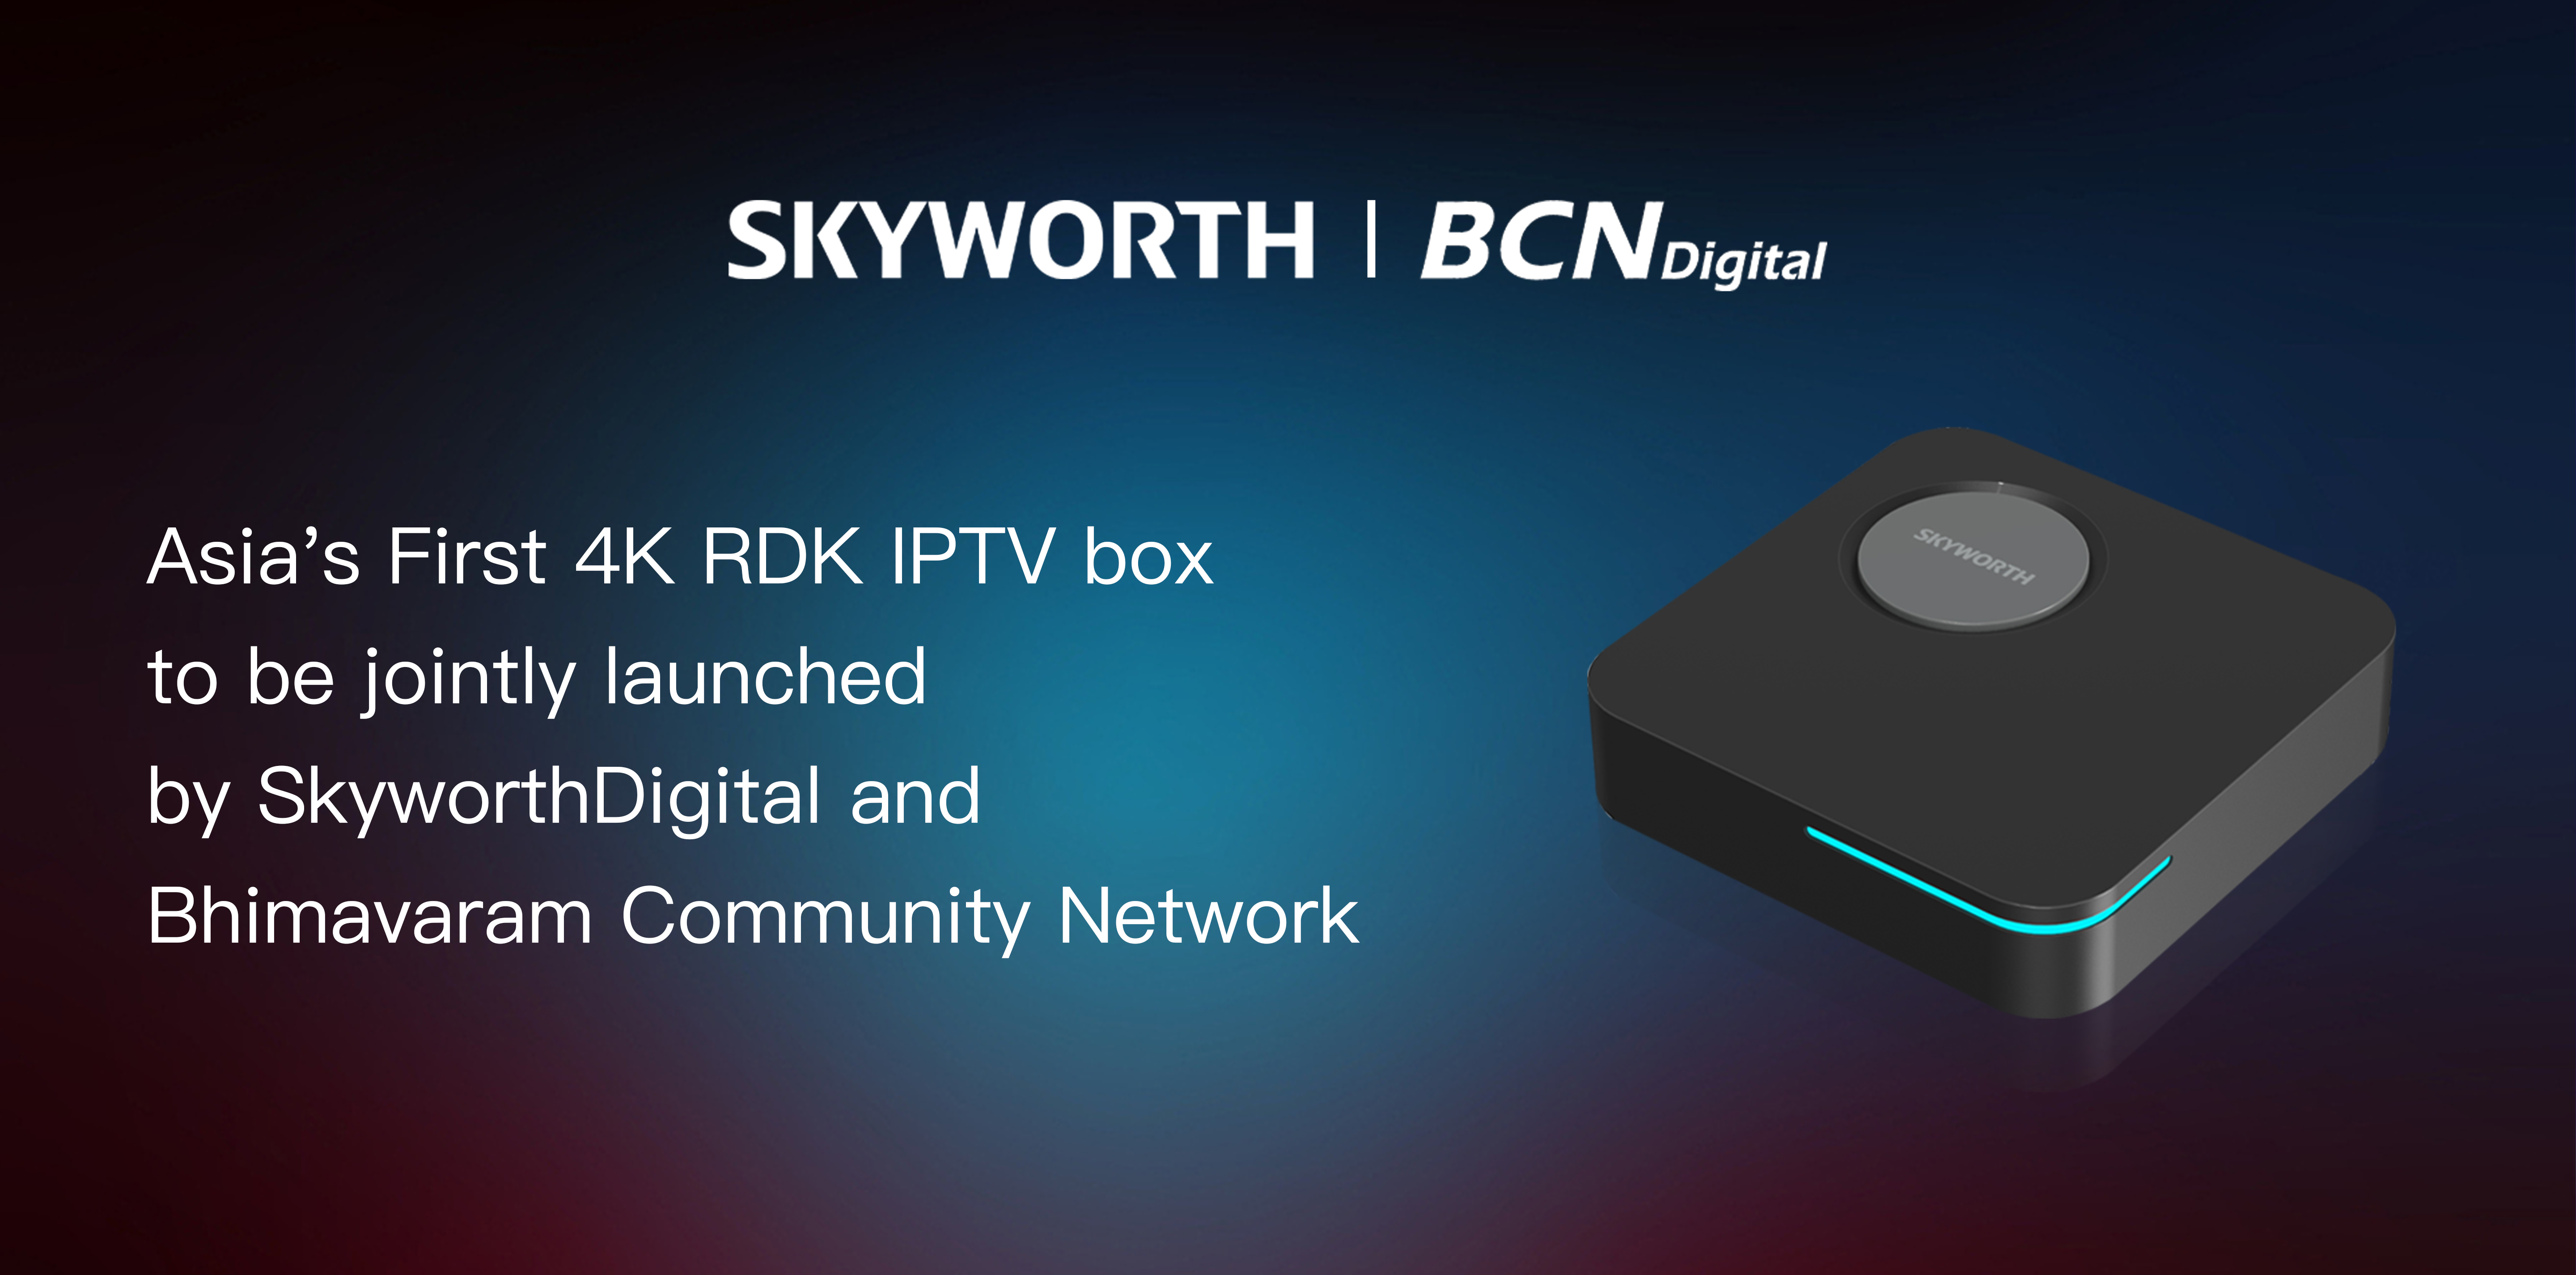 Asia's First 4K RDK IPTV box to be jointly launched by Skyworth Digital and Bhimavaram Community Network